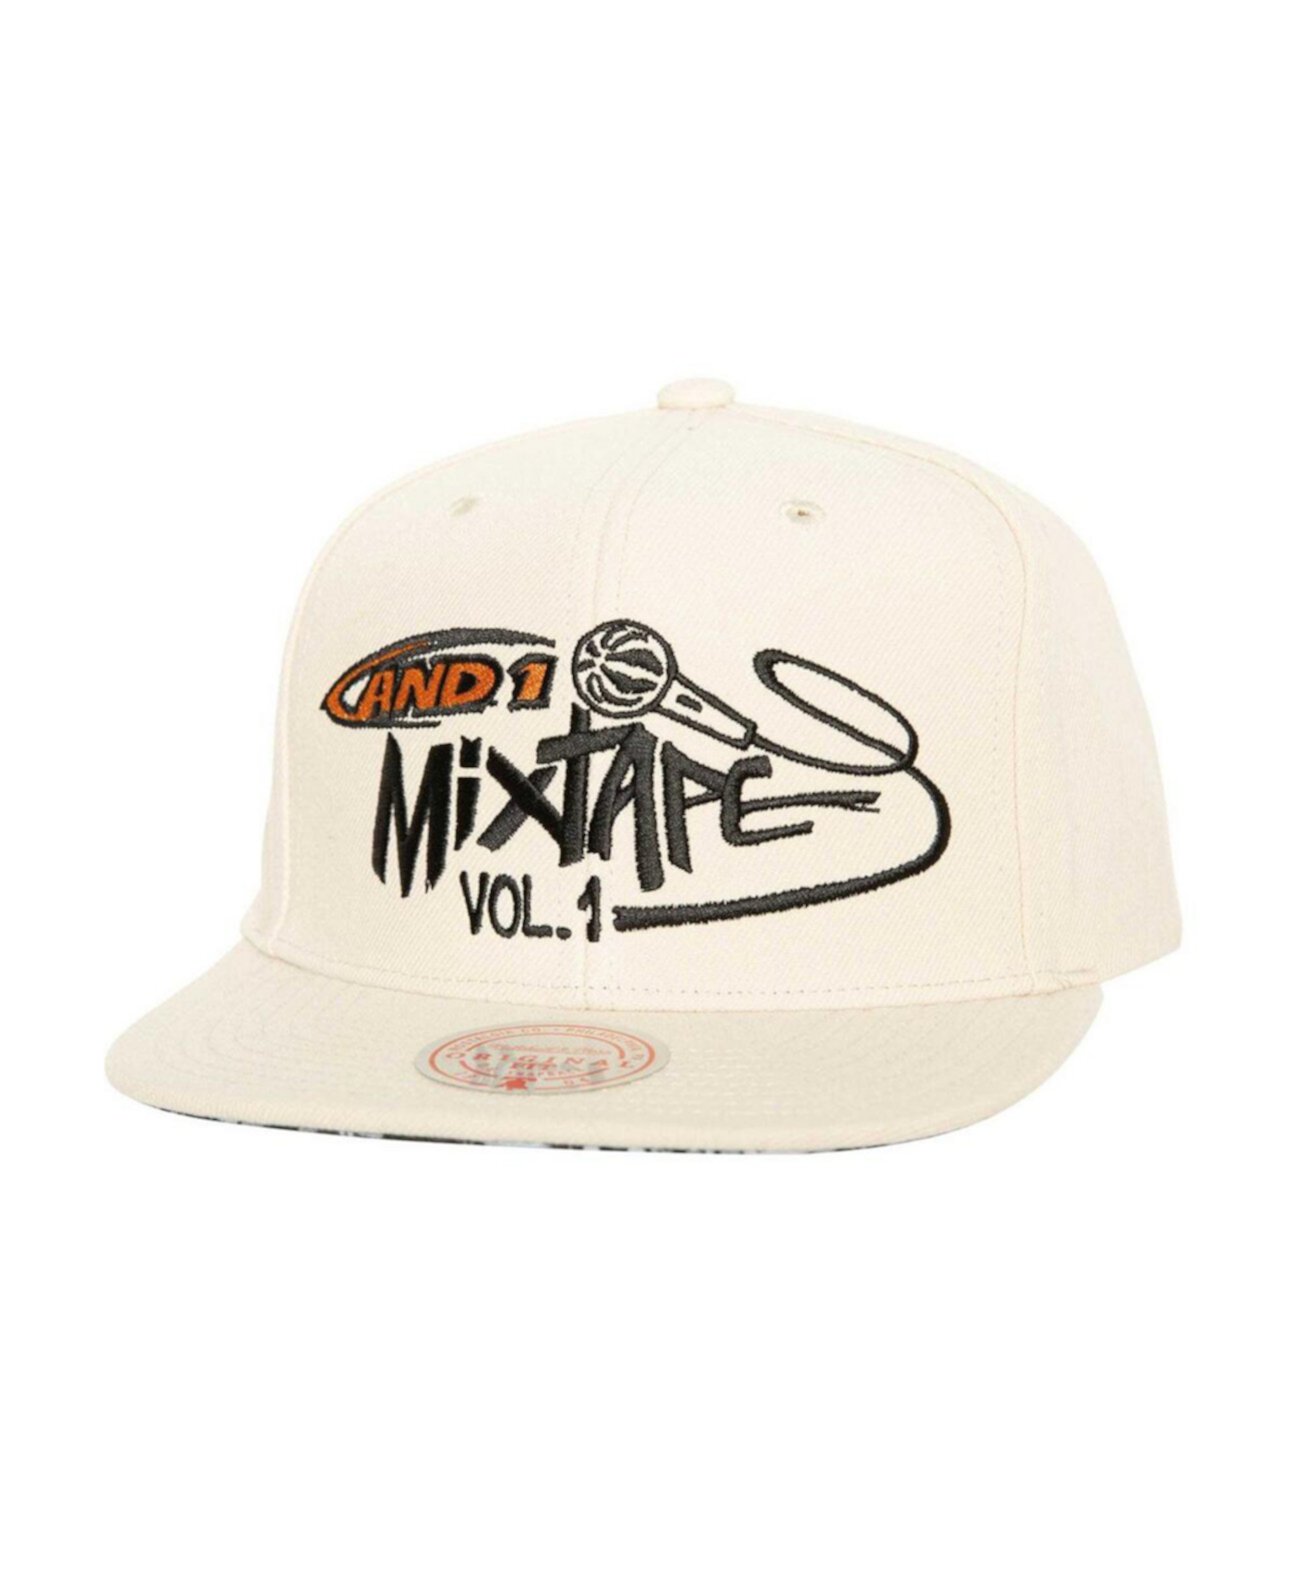 Men's x AND1 White Mixtape Vol. 1 Adjustable Hat Mitchell & Ness